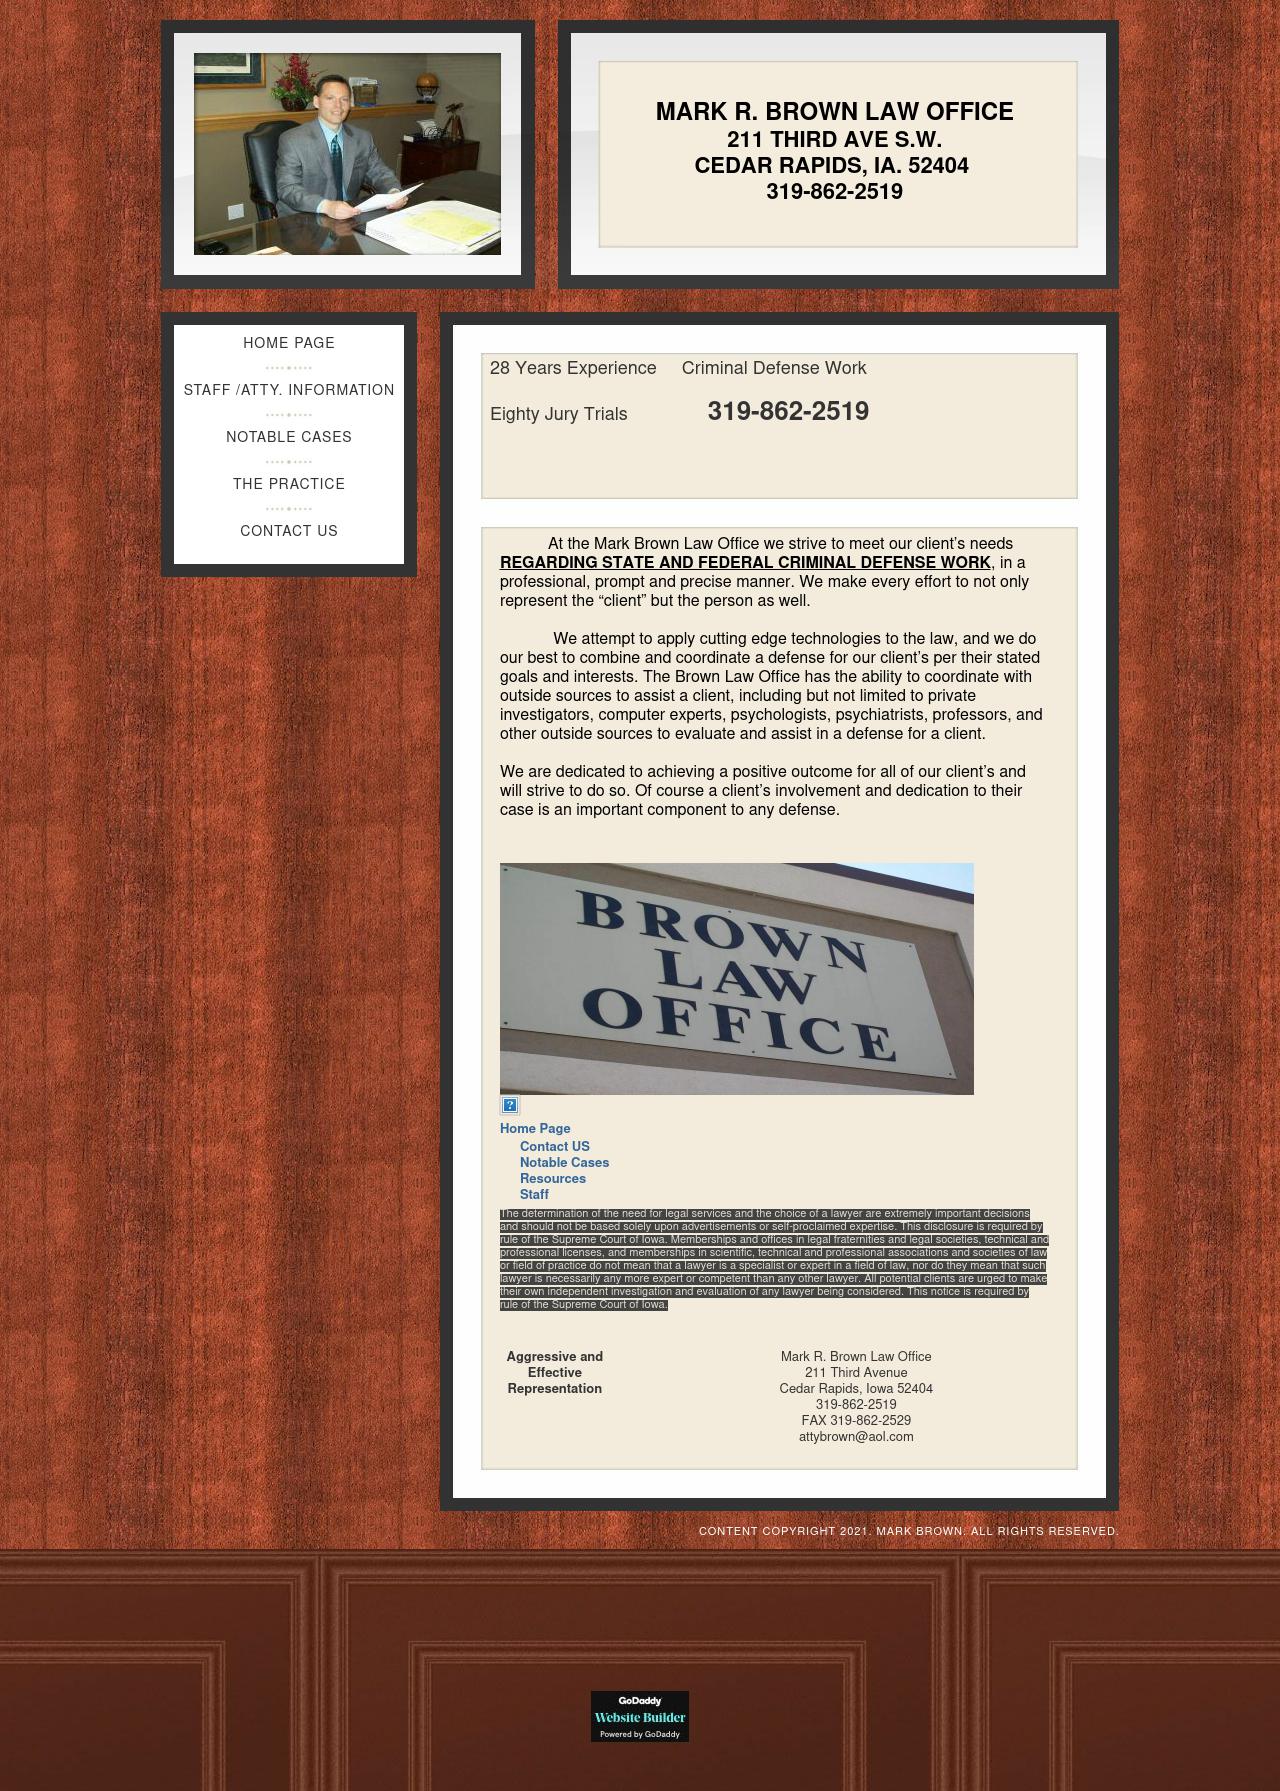 Brown Law Office-State and Federal Criminal Law Only. - Cedar Rapids IA Lawyers